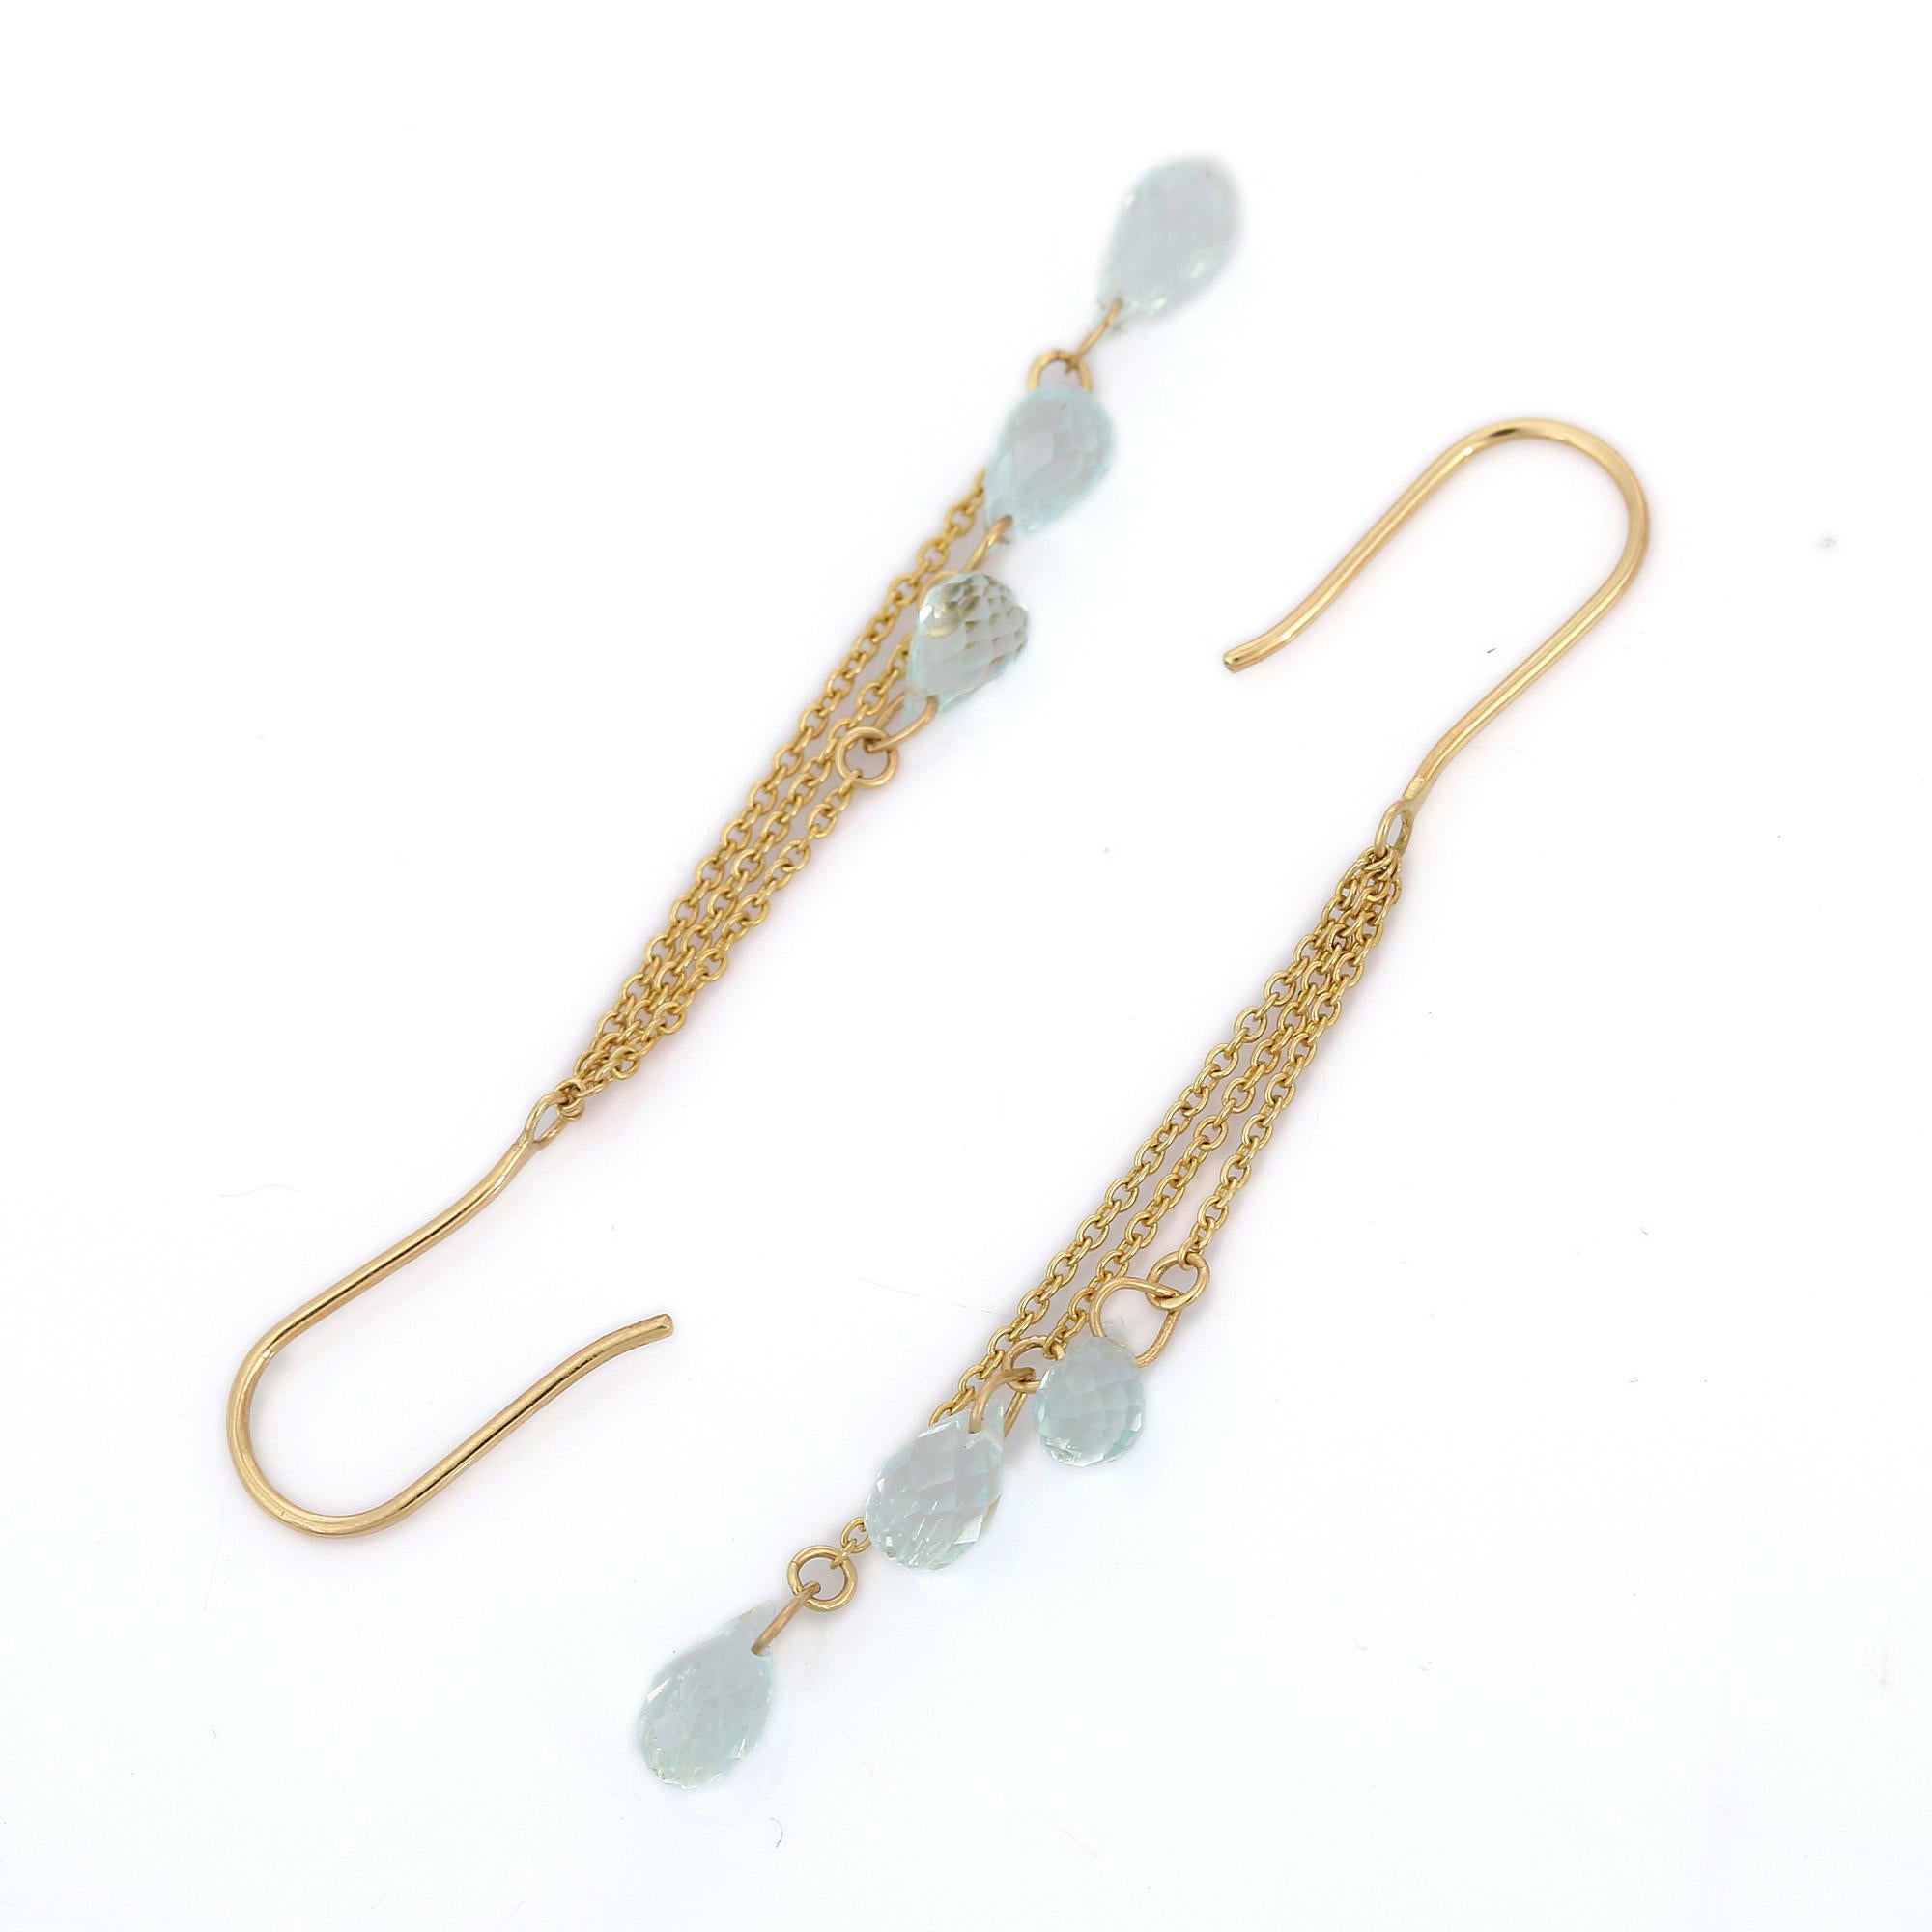 You shall need aquamarine drop earrings to make a statement with your look. These earrings create a sparkling, luxurious look featuring drop cut gemstone. Lightweight and gorgeous, these are a great bridesmaid, wedding or christmas gift for anyone